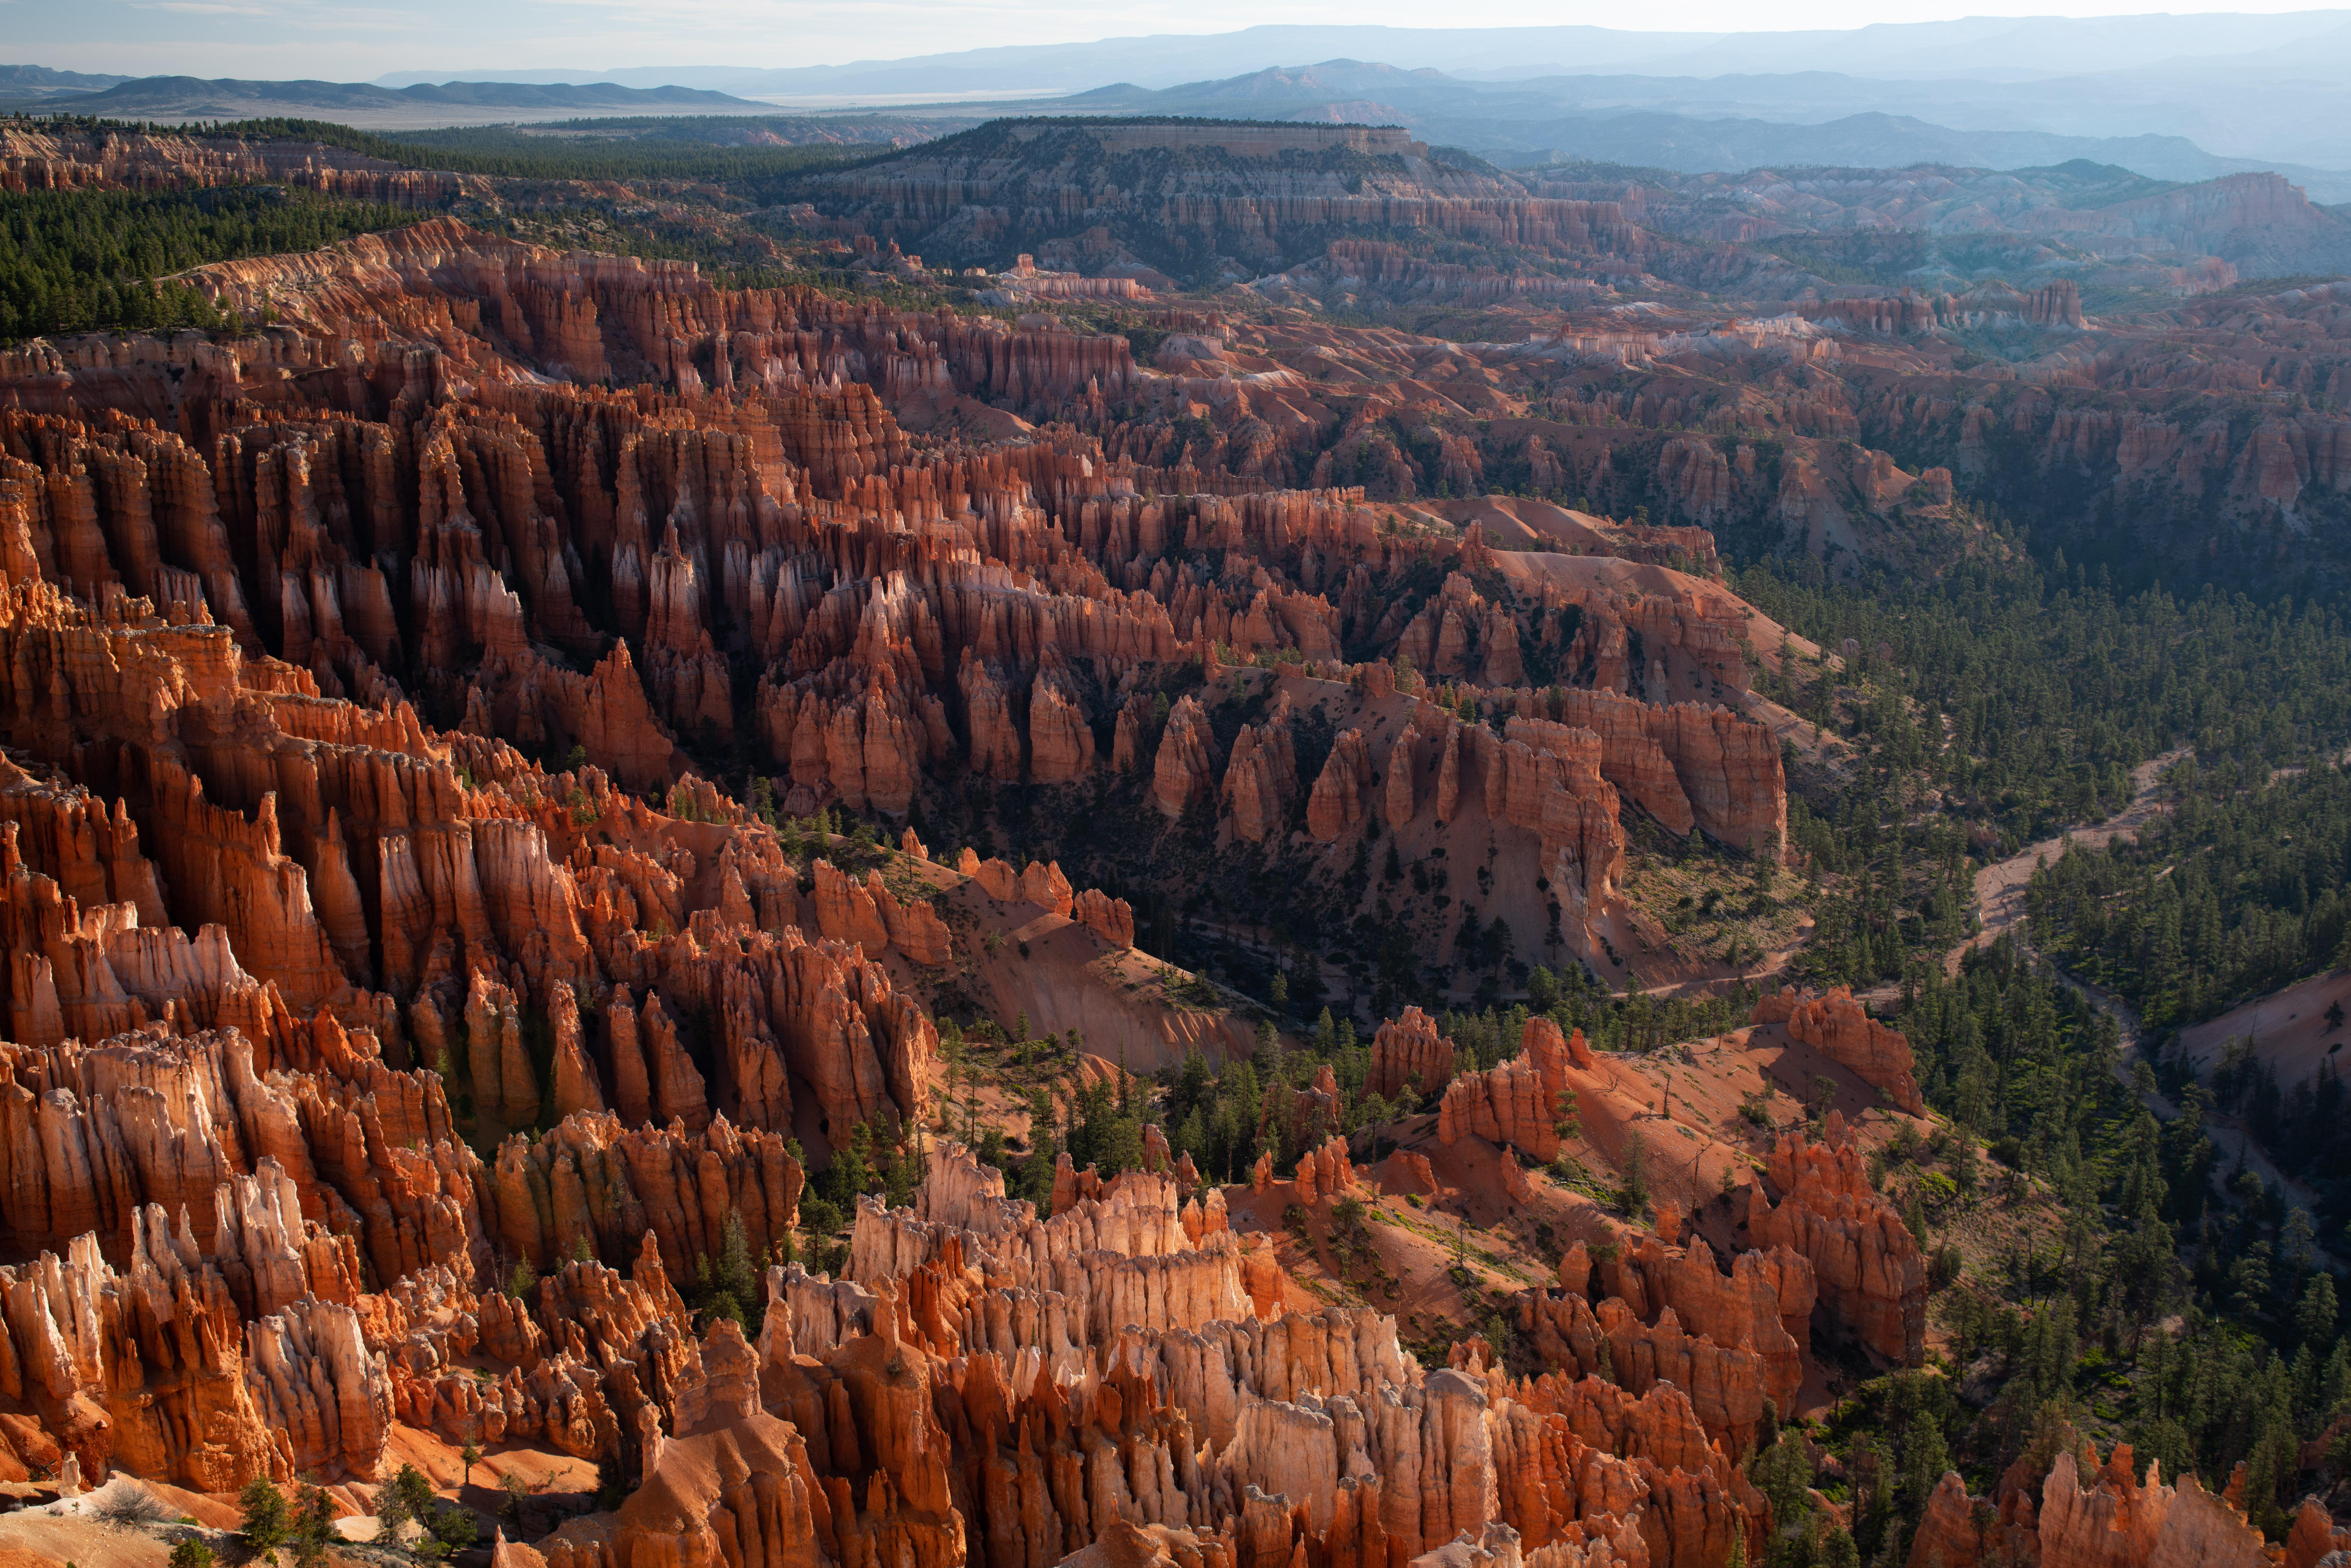 A red rock landscape and plateau forest glows with the morning sun